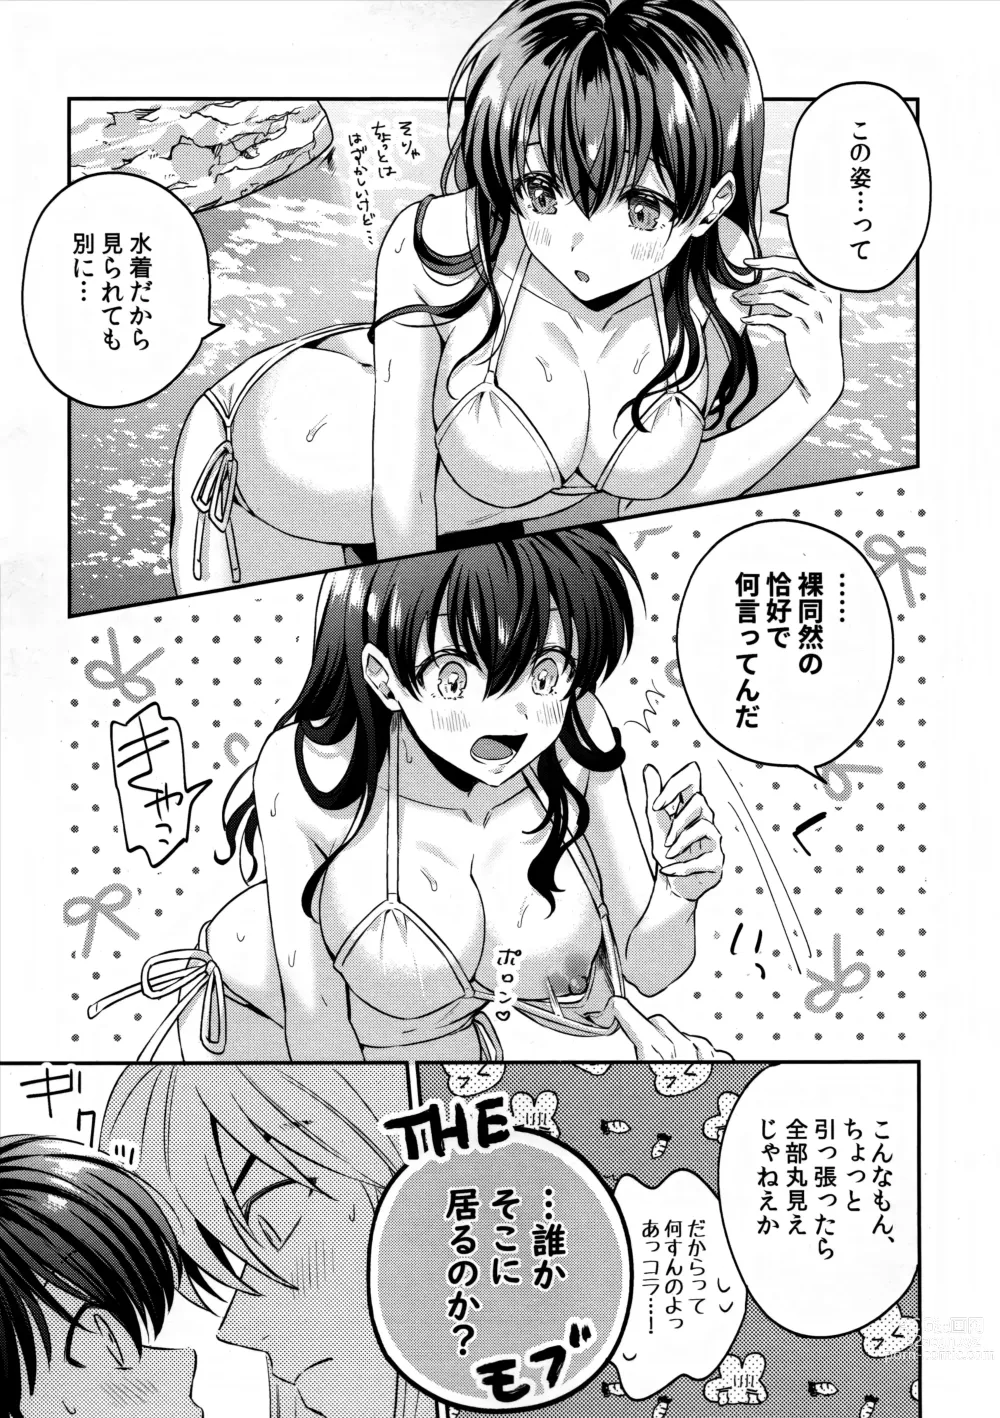 Page 10 of doujinshi LATE-SUMMER GREETHINGS TO YOU!